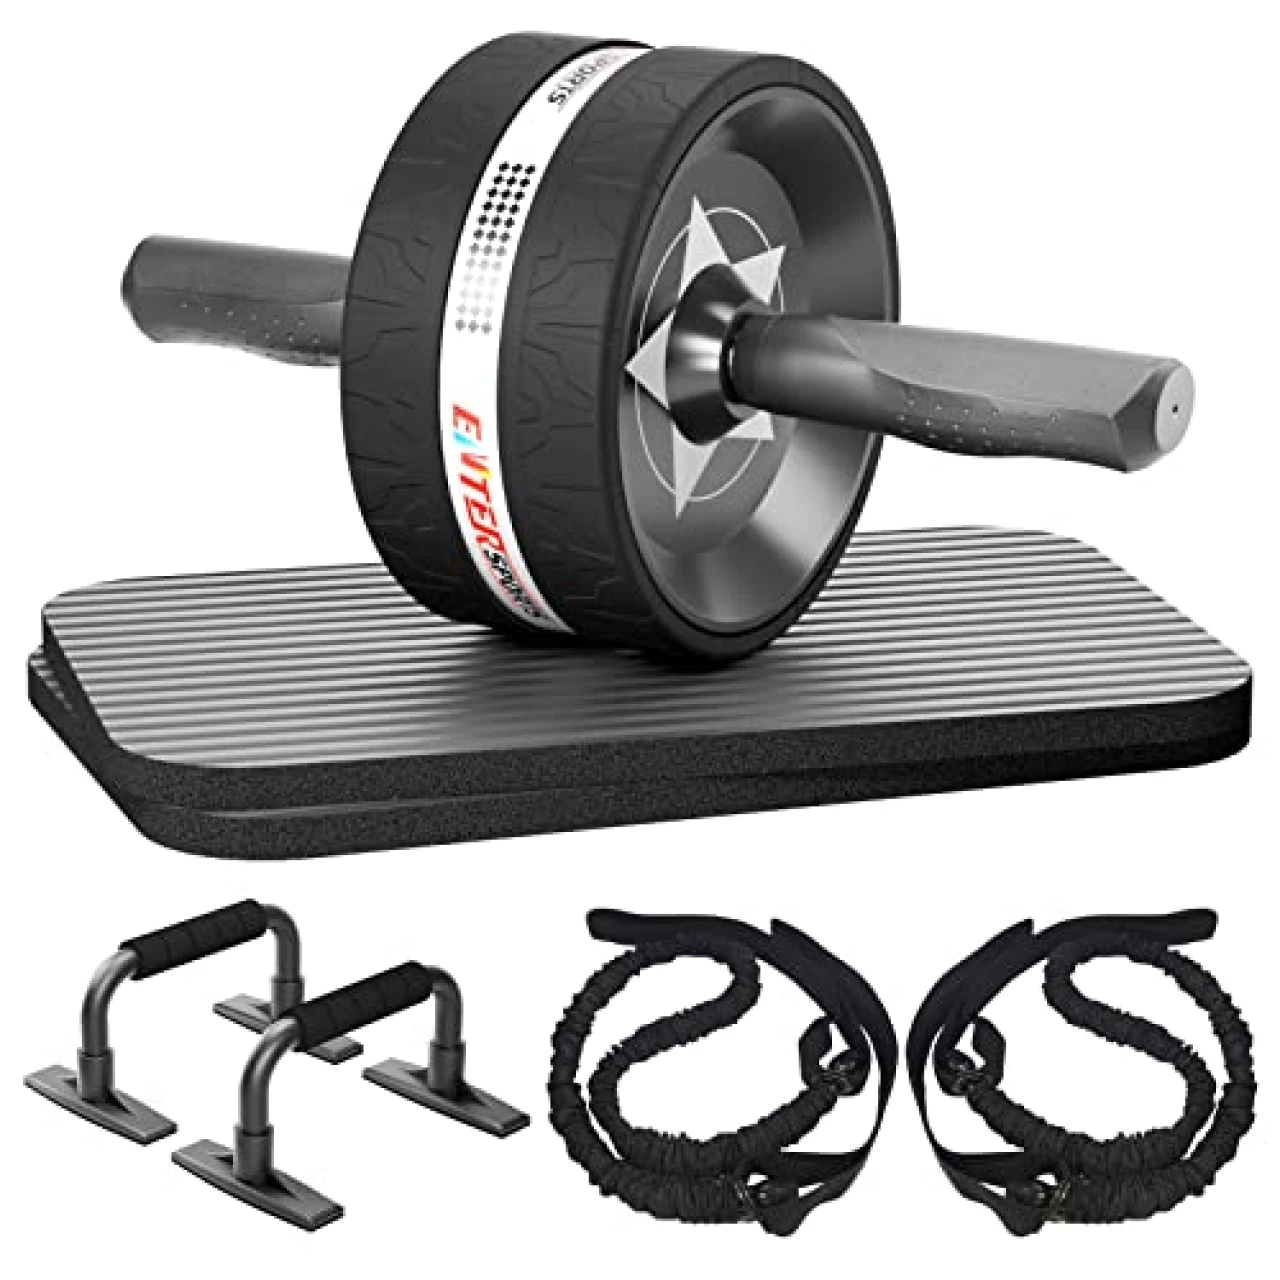 EnterSports Abs Roller Wheel Kit, Exercise Wheel Core Strength Training Abdominal Roller Set with Push Up Bars, Resistance Bands, Knee Mat Home Gym Fitness Equipment